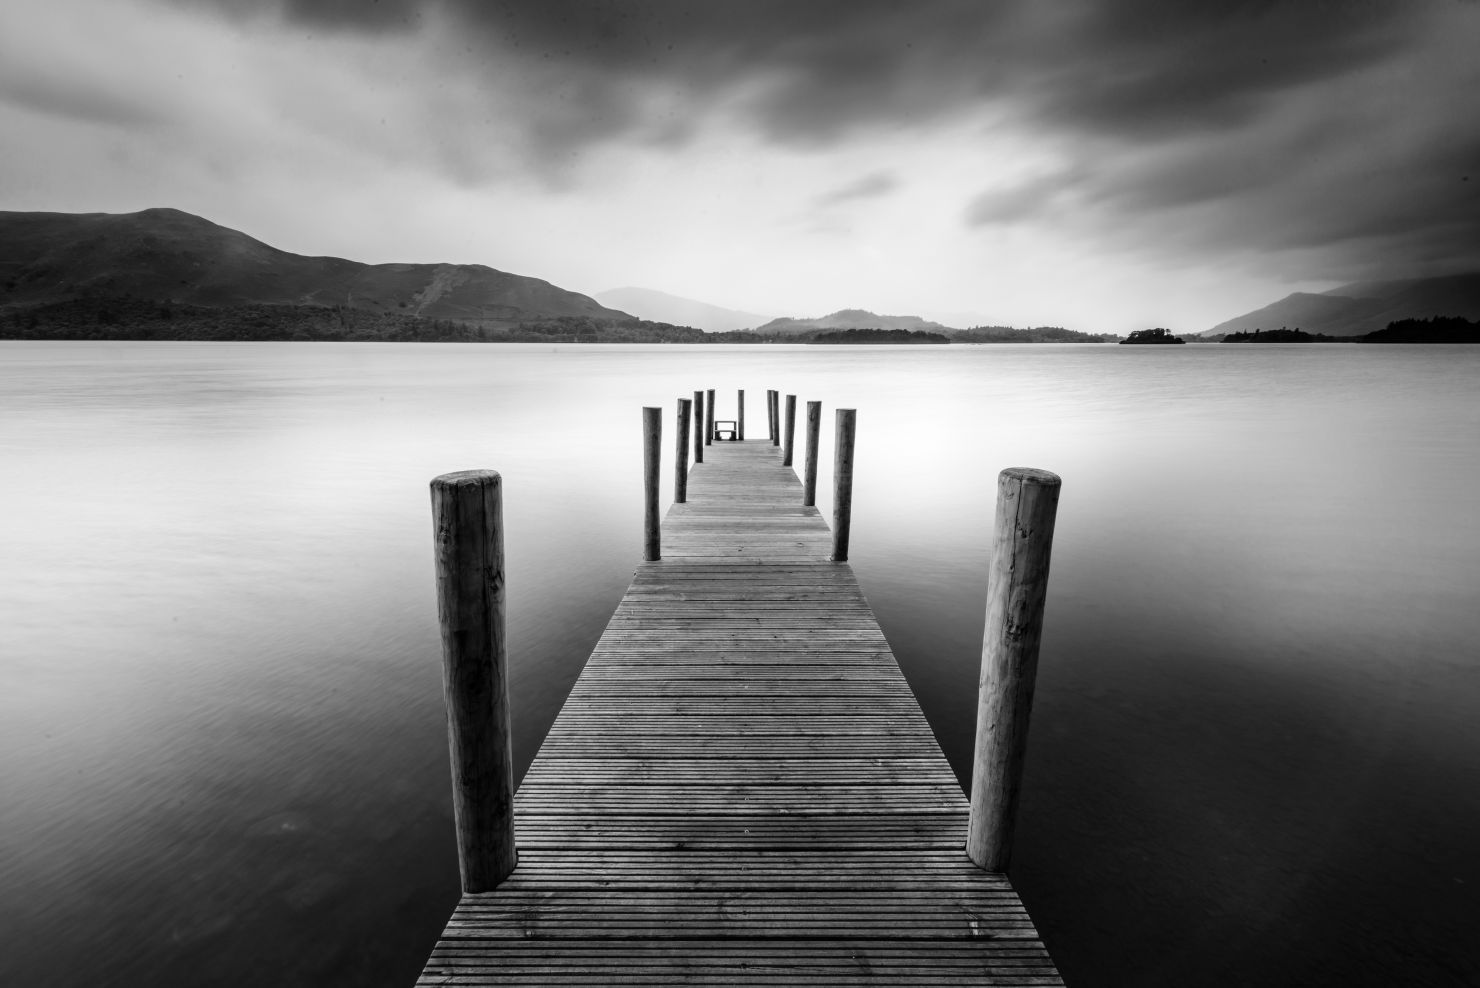 Jetty by the lake